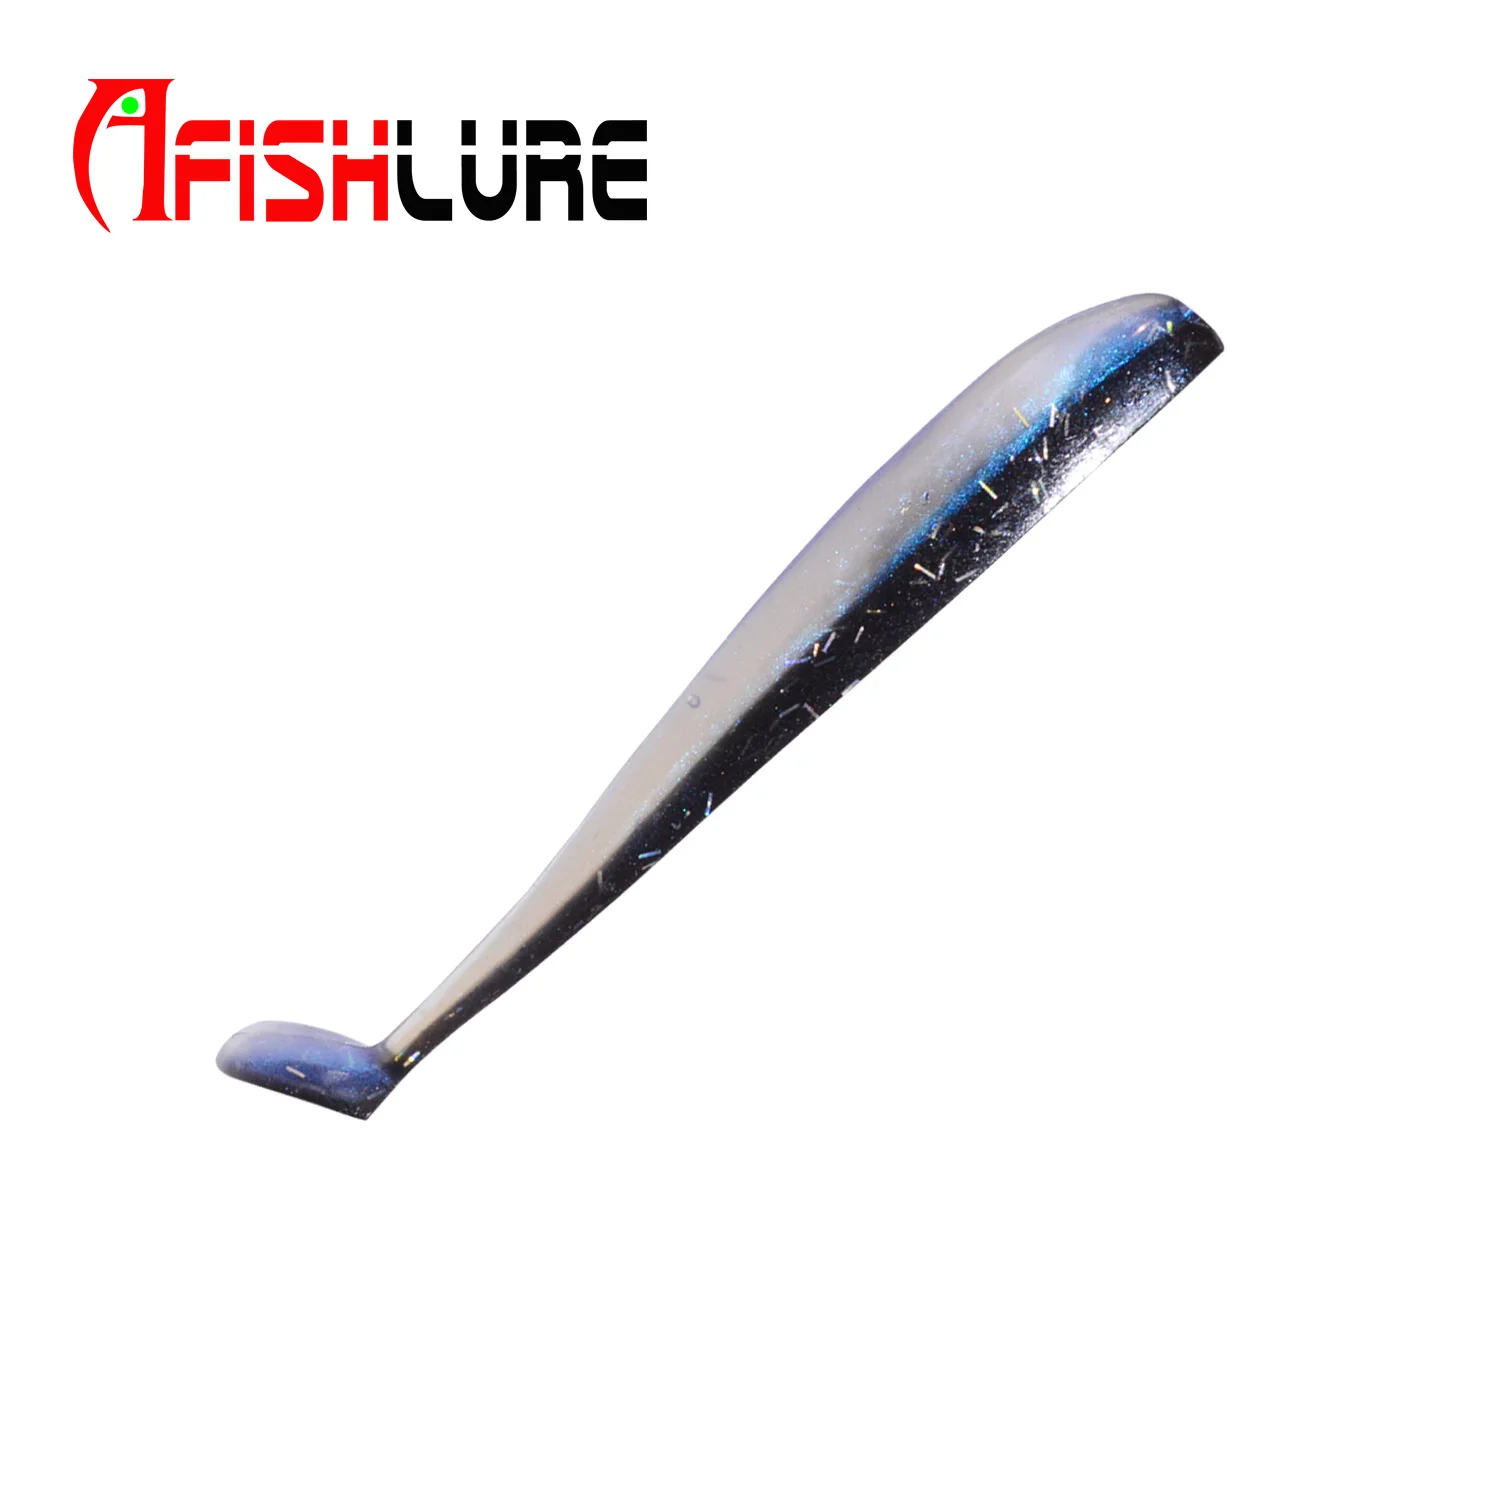 

Afishlure lure Free sample plastic soft fishing lure 130mm 12g AR64 Integrated Bait, Multi or customized